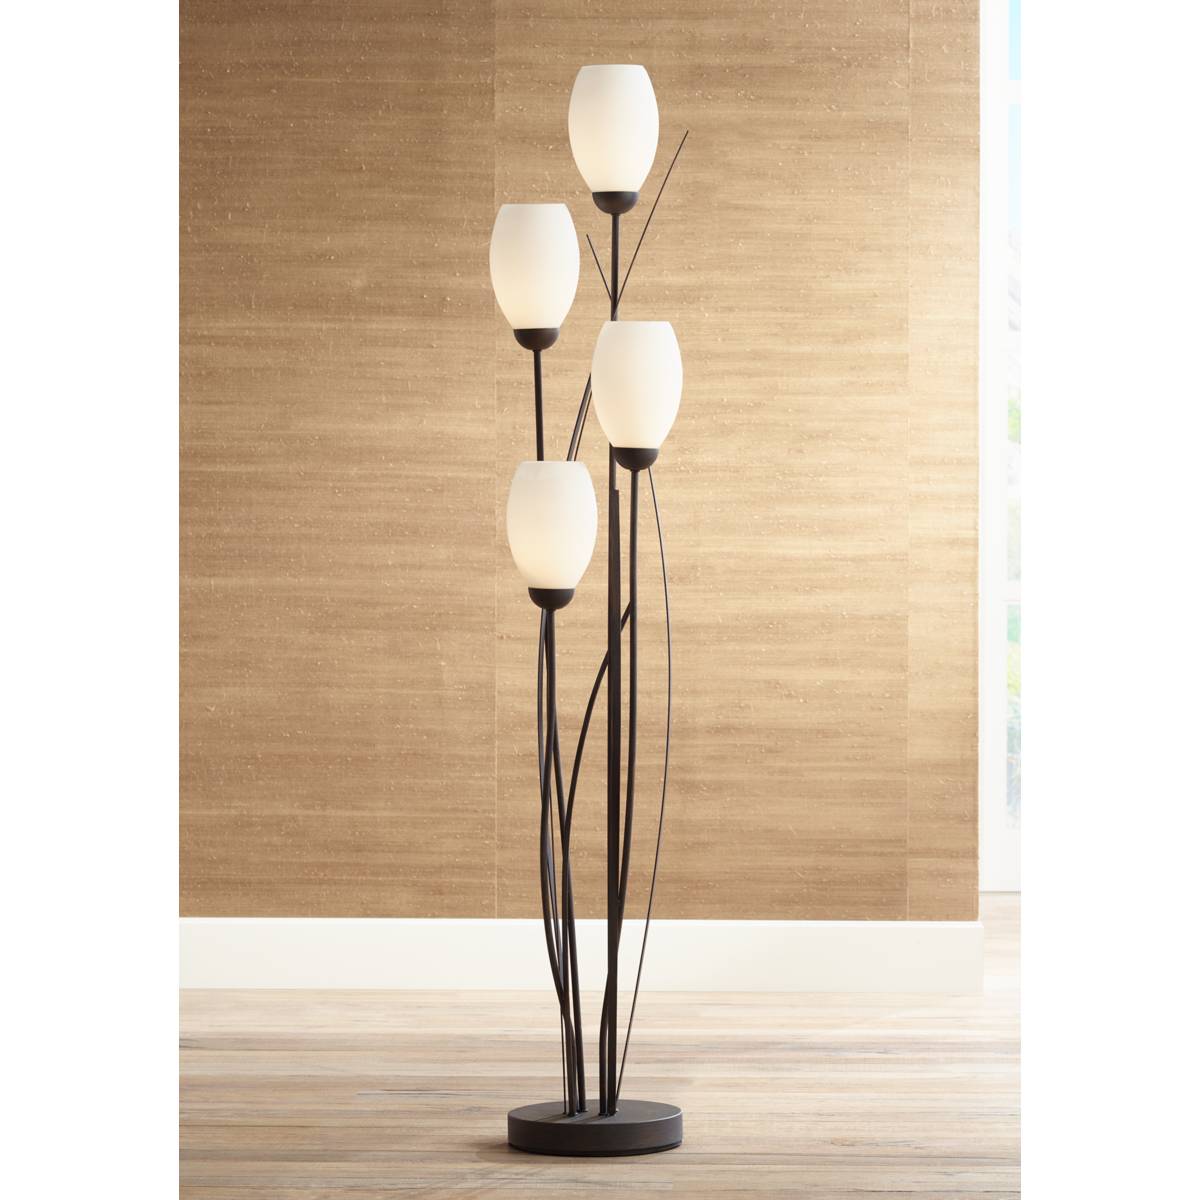 Extra Tall Contemporary Floor Lamps, Tall Contemporary Floor Lamps